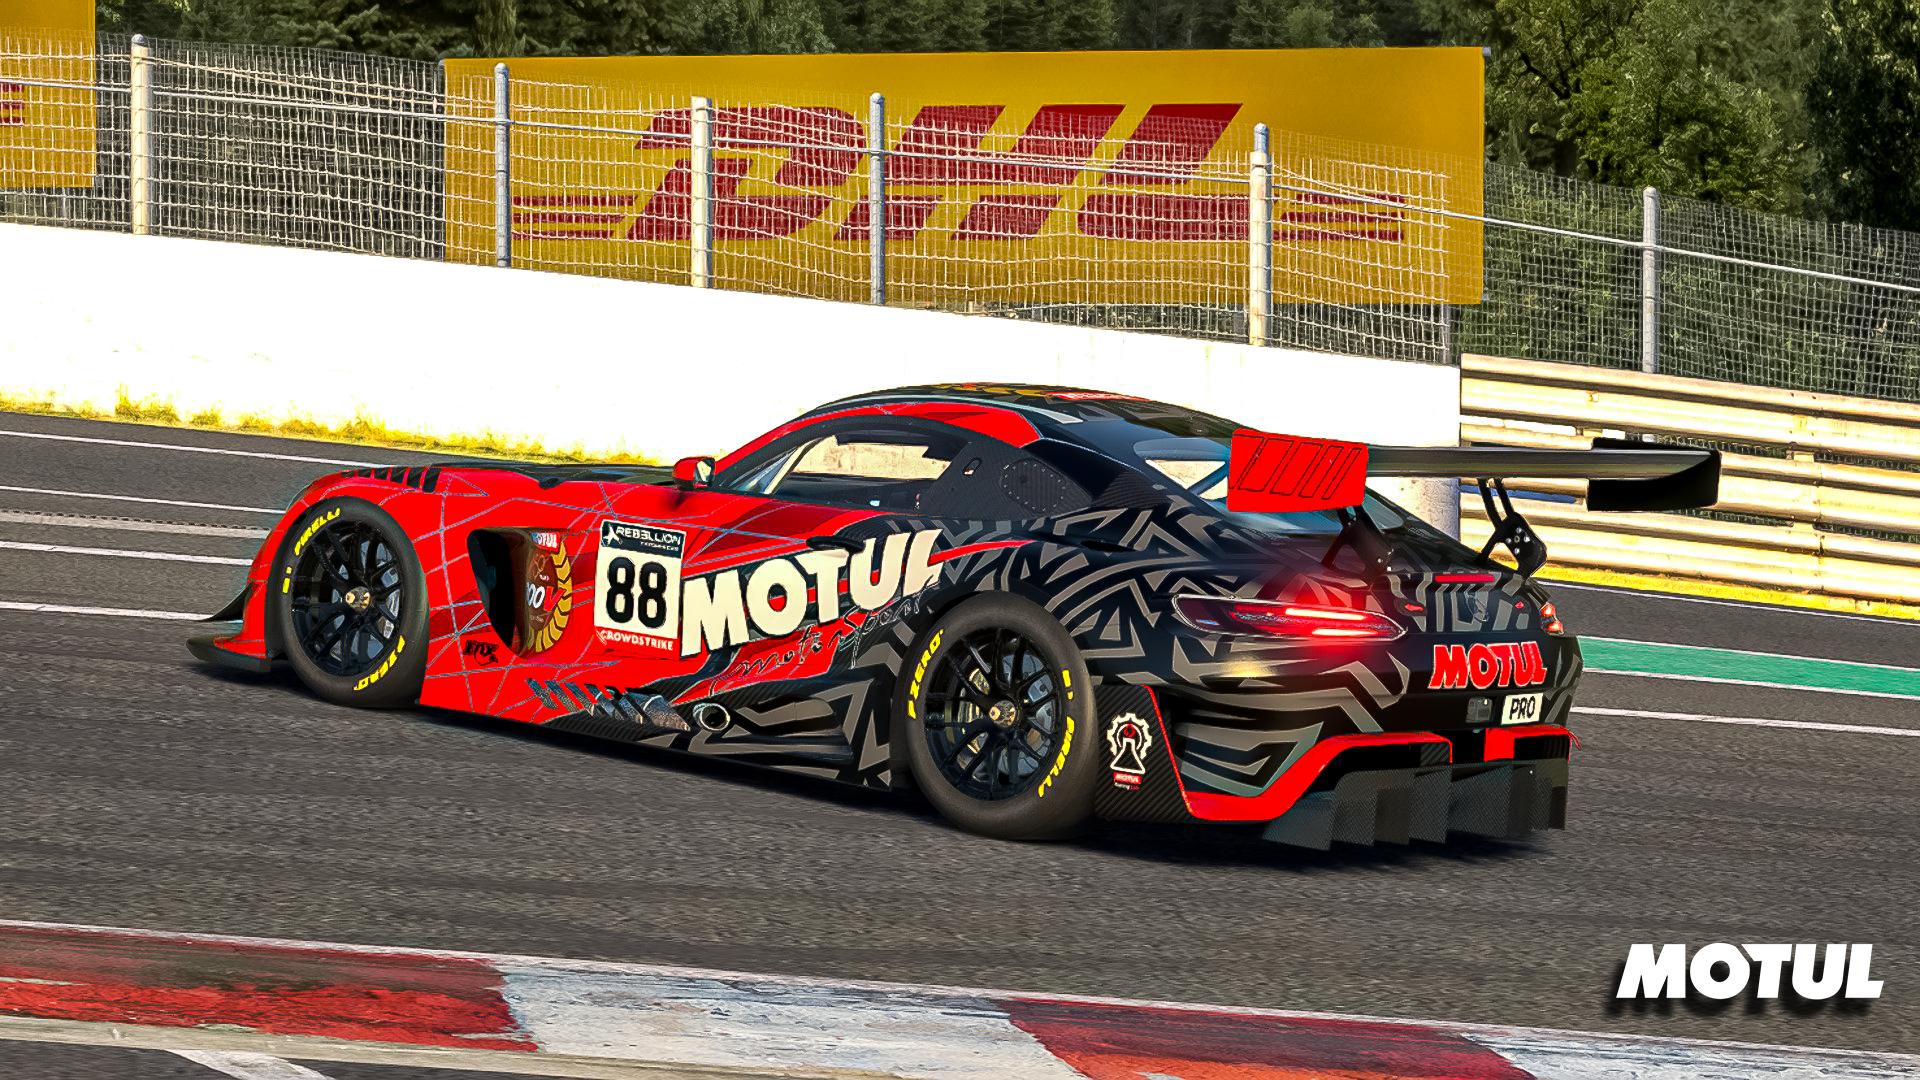 Preview of Motul AMG GT3 by Paul Mansell